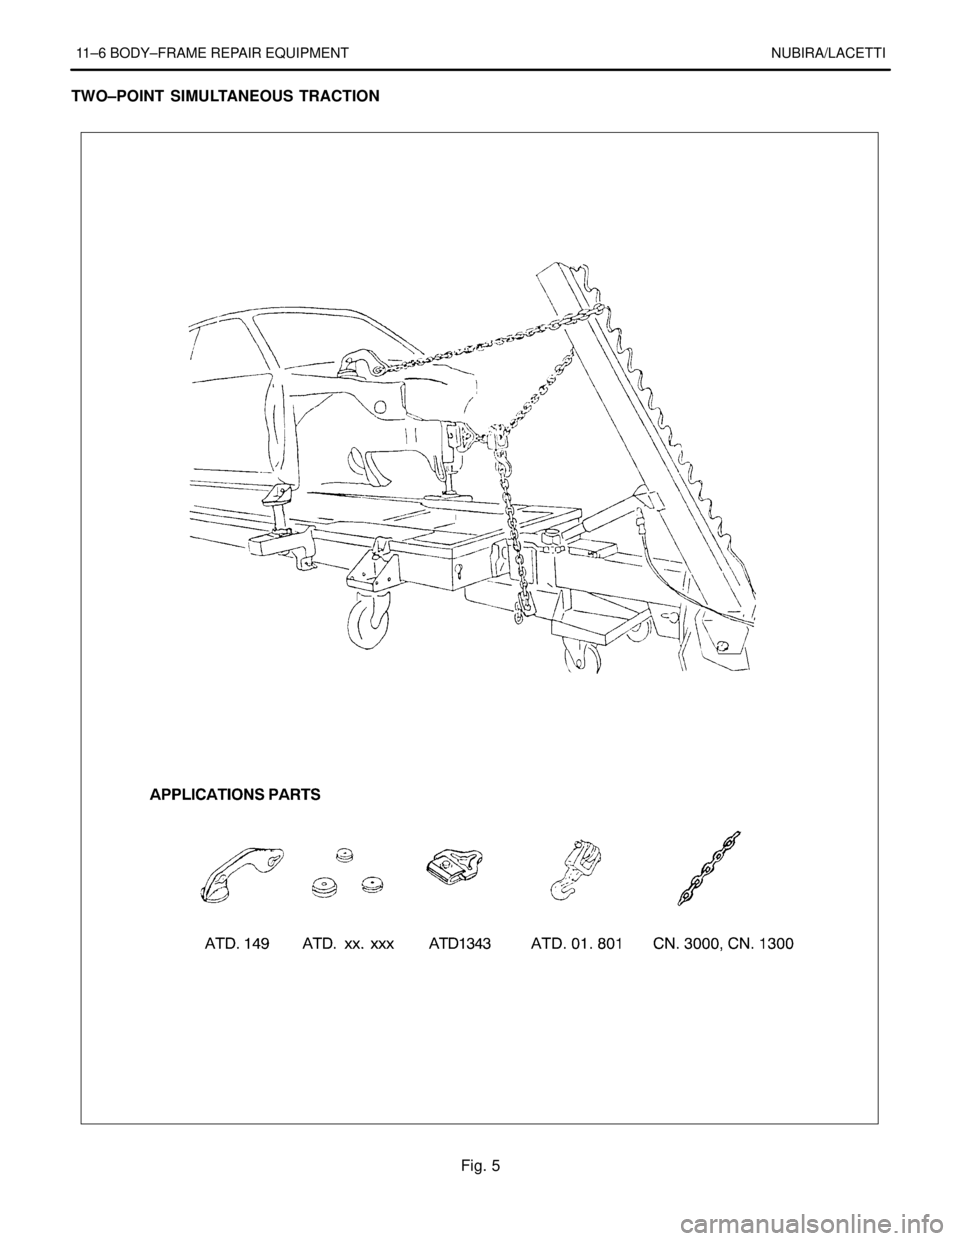 DAEWOO LACETTI 2004  Service Repair Manual 11–6 BODY–FRAME REPAIR EQUIPMENT NUBIRA/LACETTI
TWO–POINT  SIMULTANEOUS TRACTION
Fig. 5 